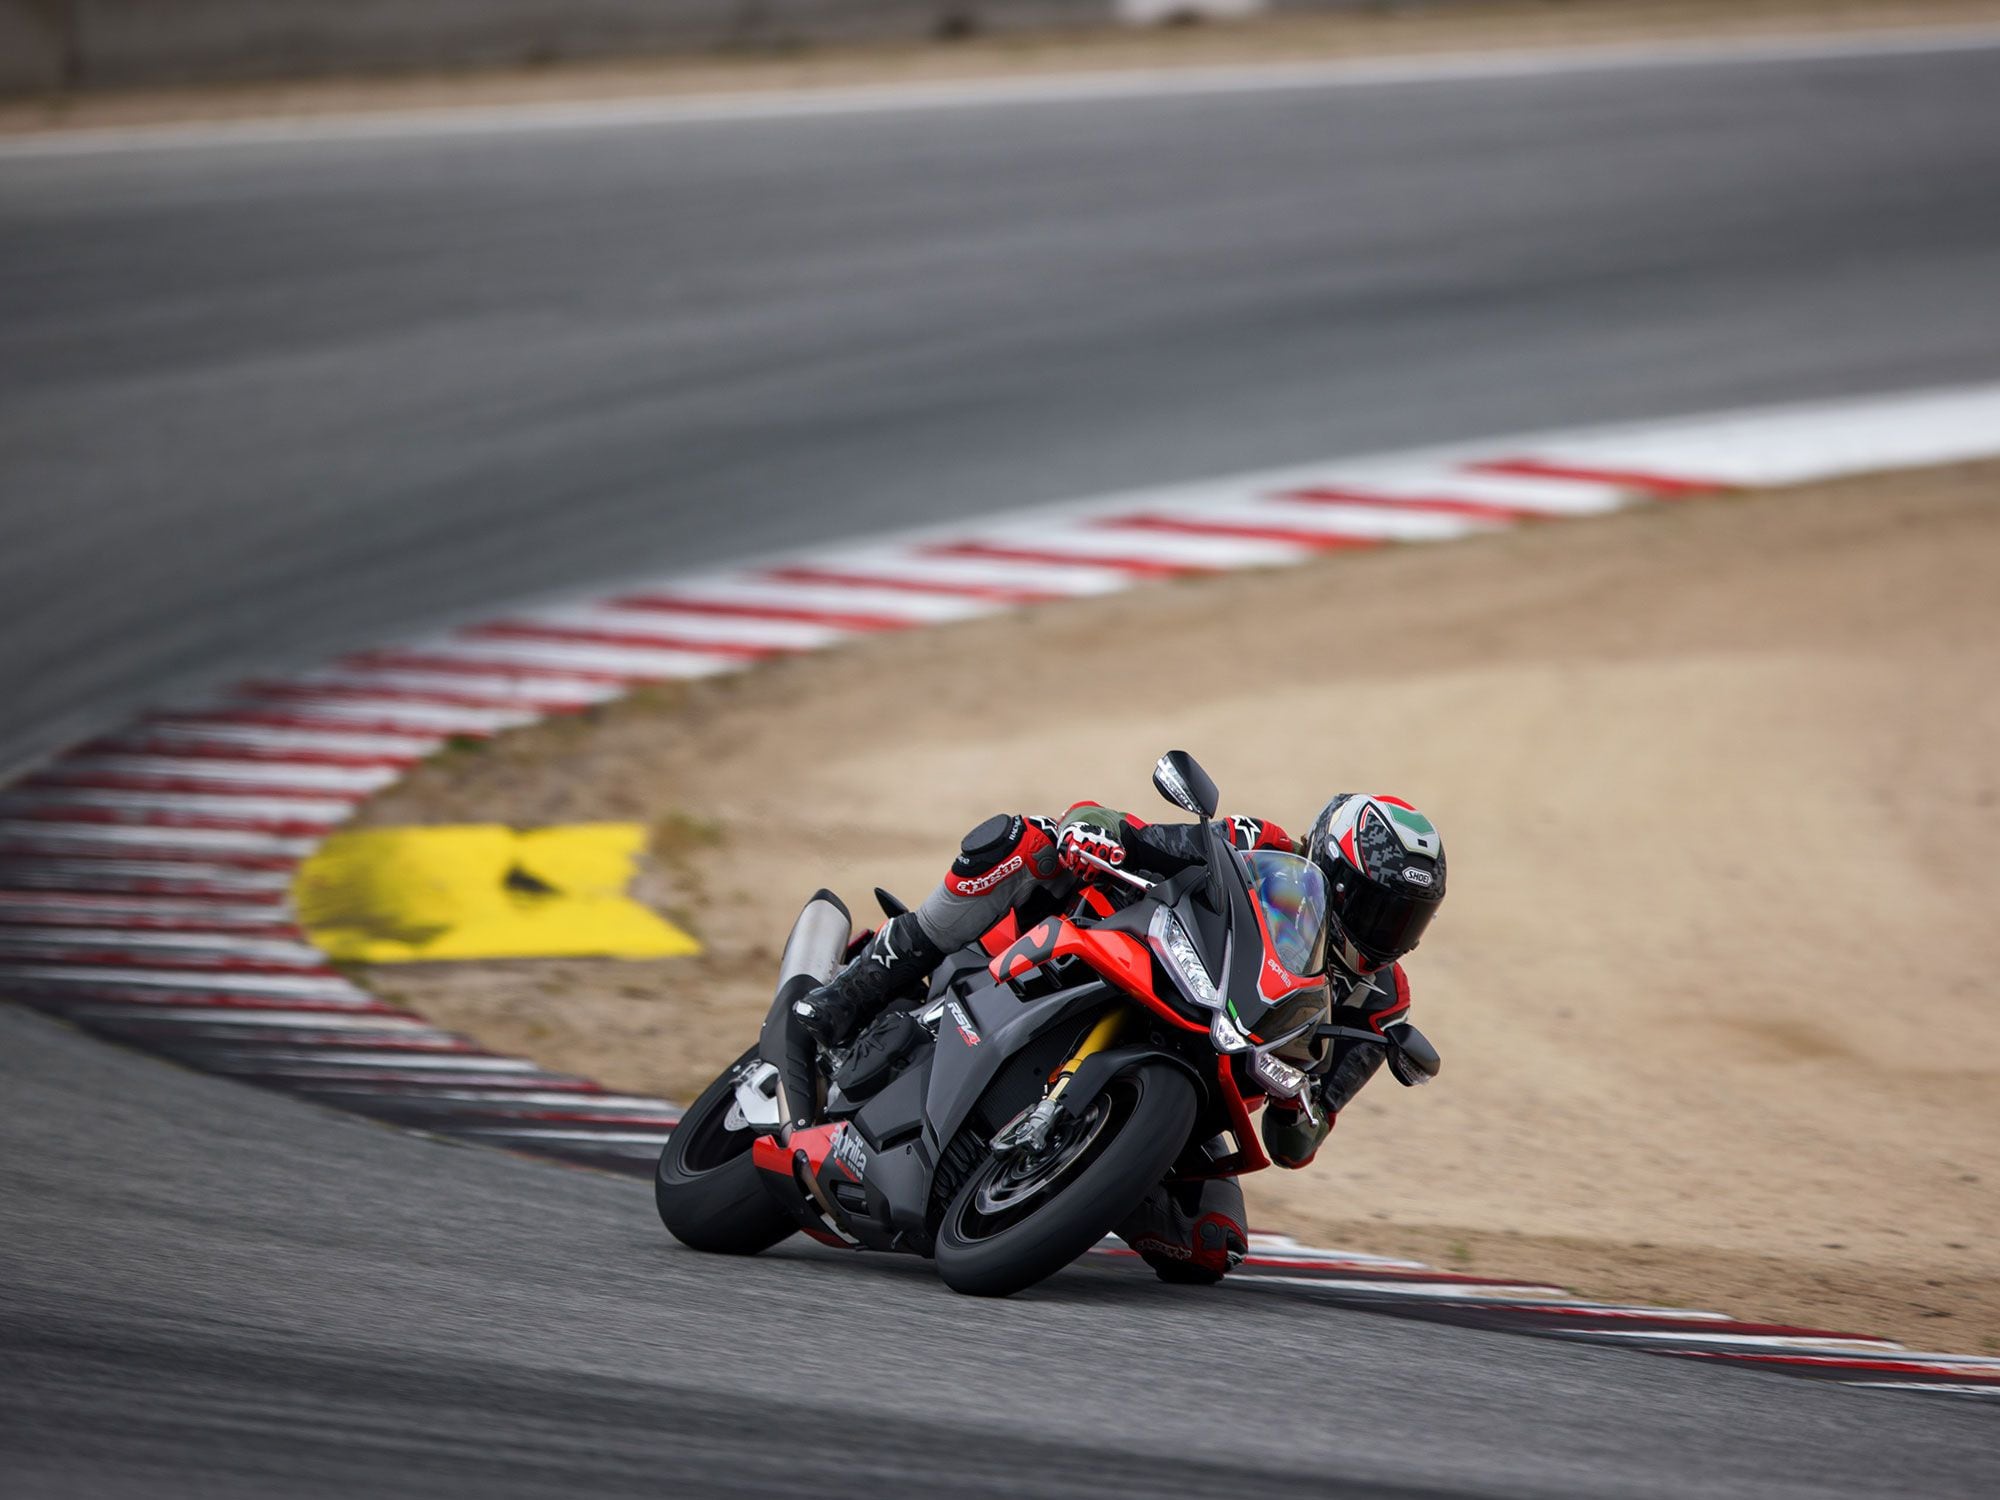 An even longer-stroke 1,099cc engine boosts midrange torque and allows the RSV4 to leap off turns.